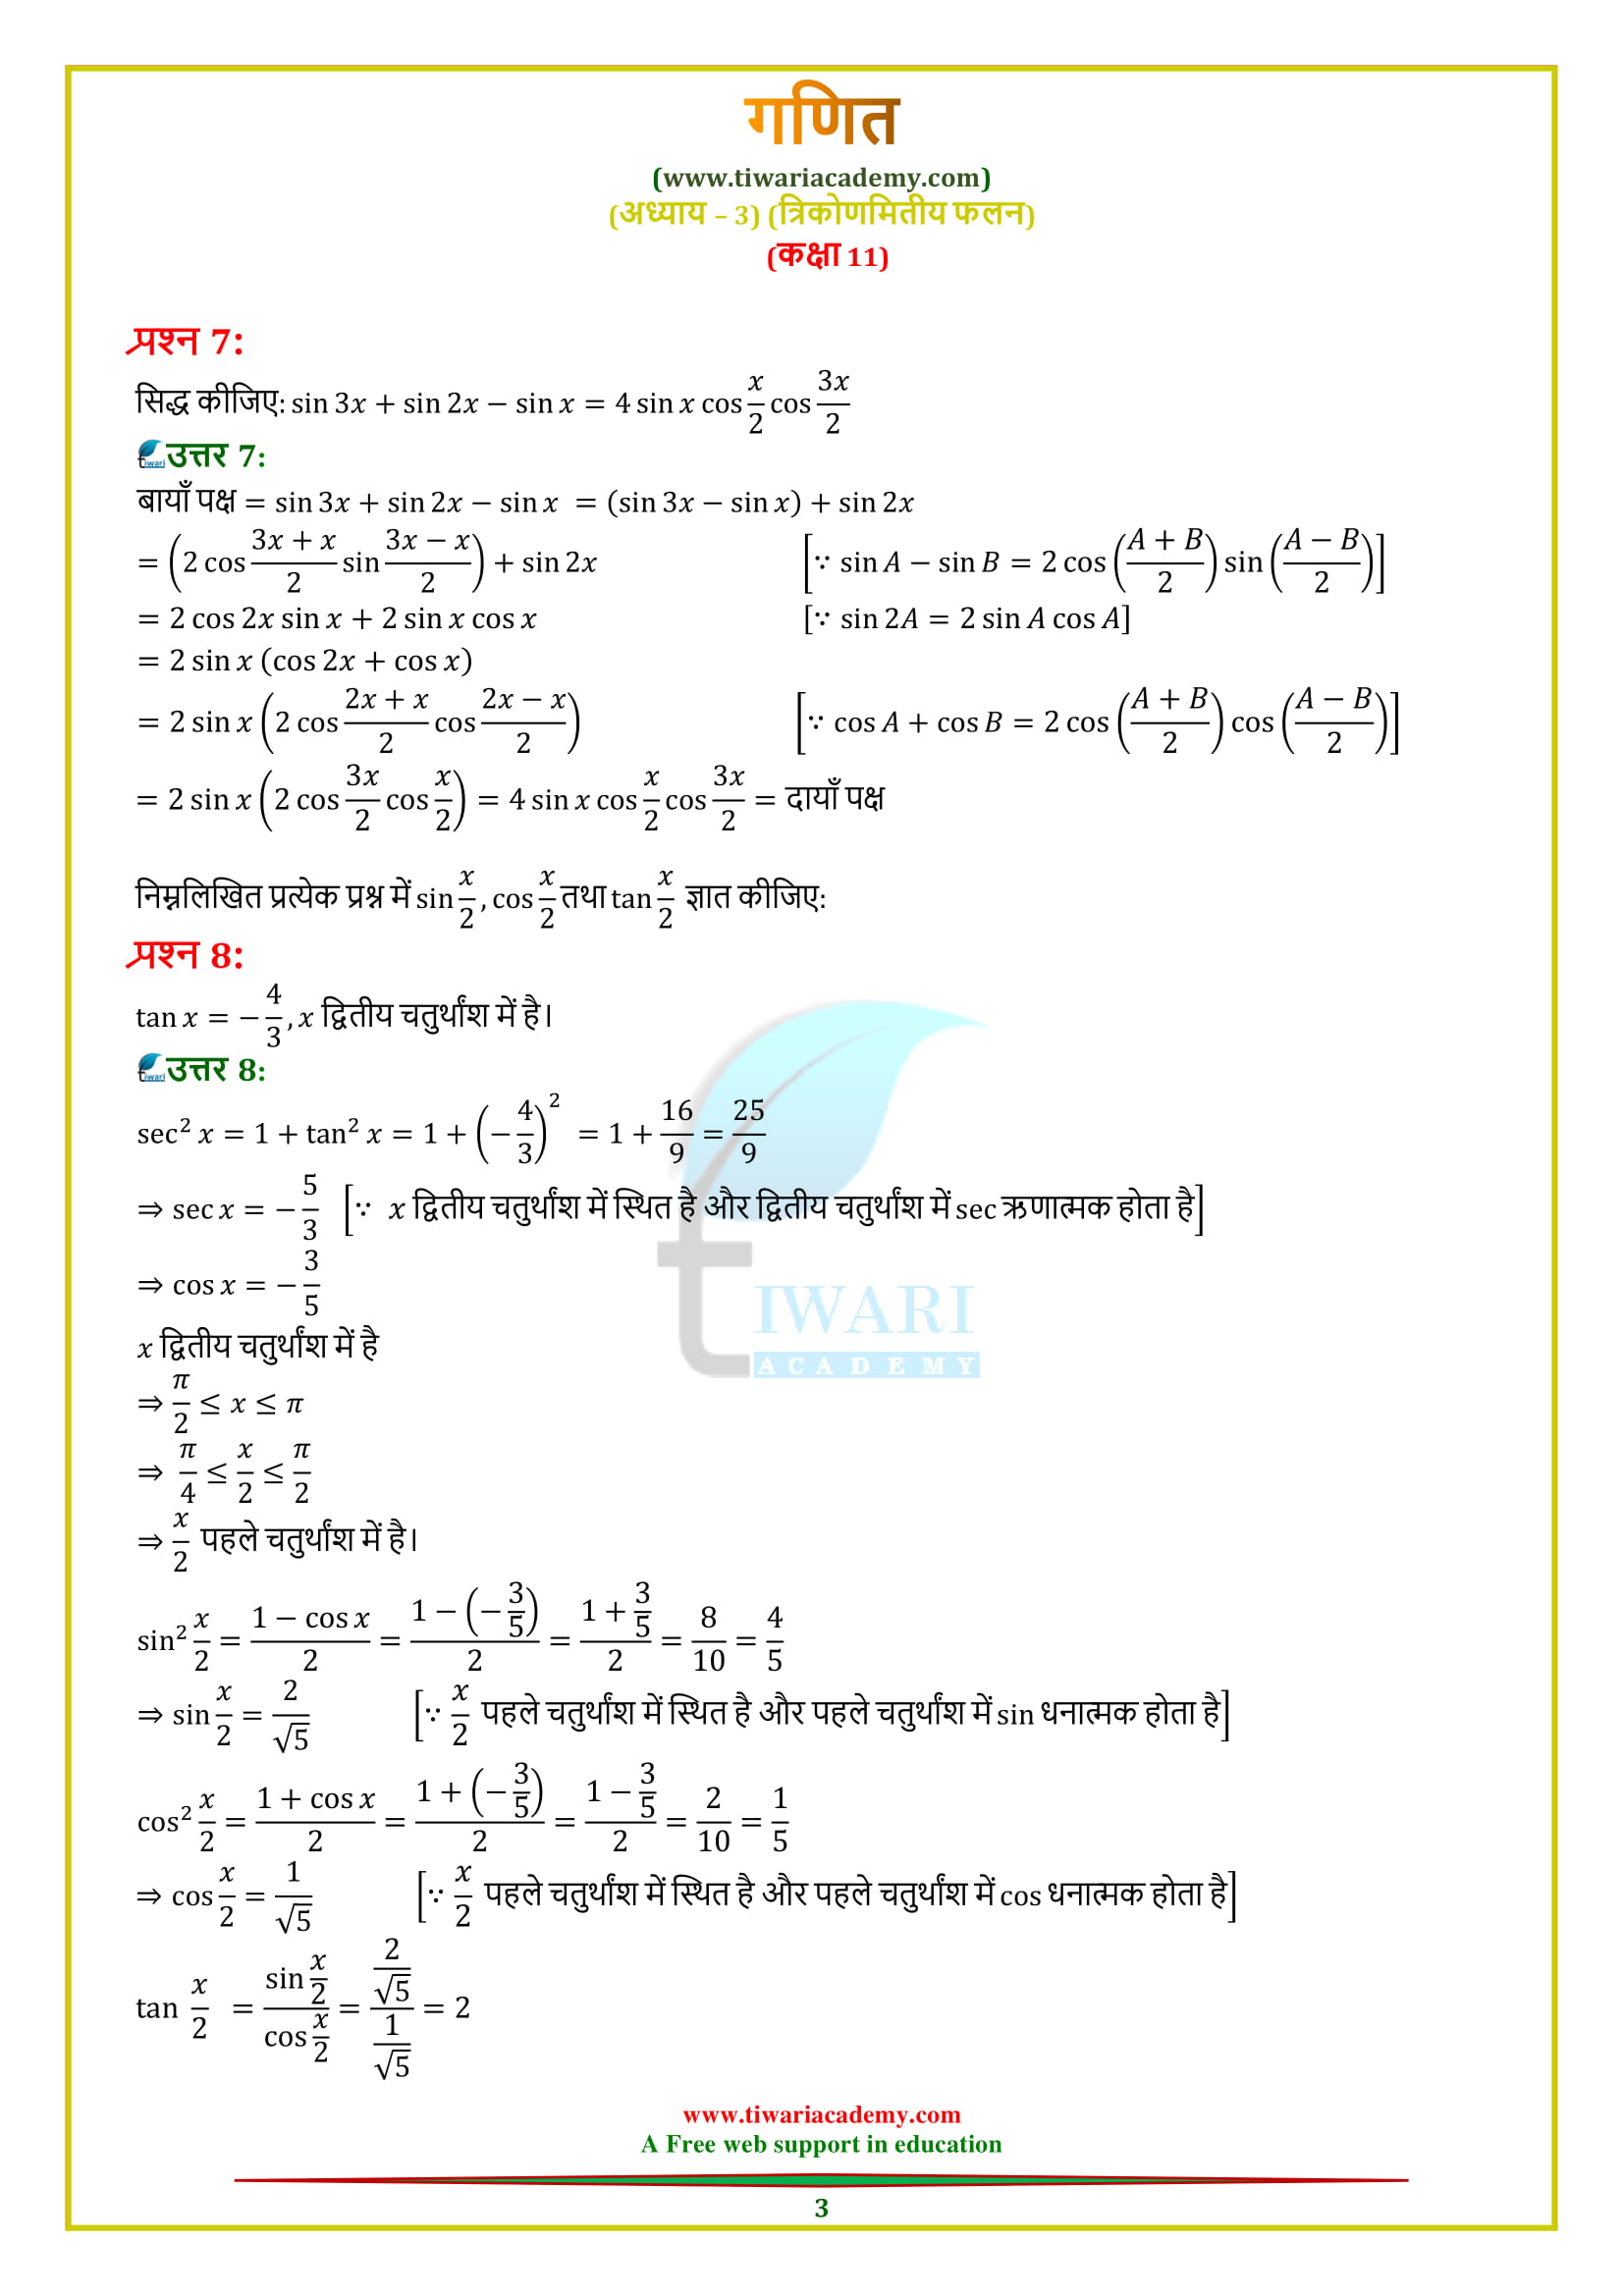 NCERT Solutions for Class 11 Maths Chapter 3 Miscellaneous Exercise kunji (key)